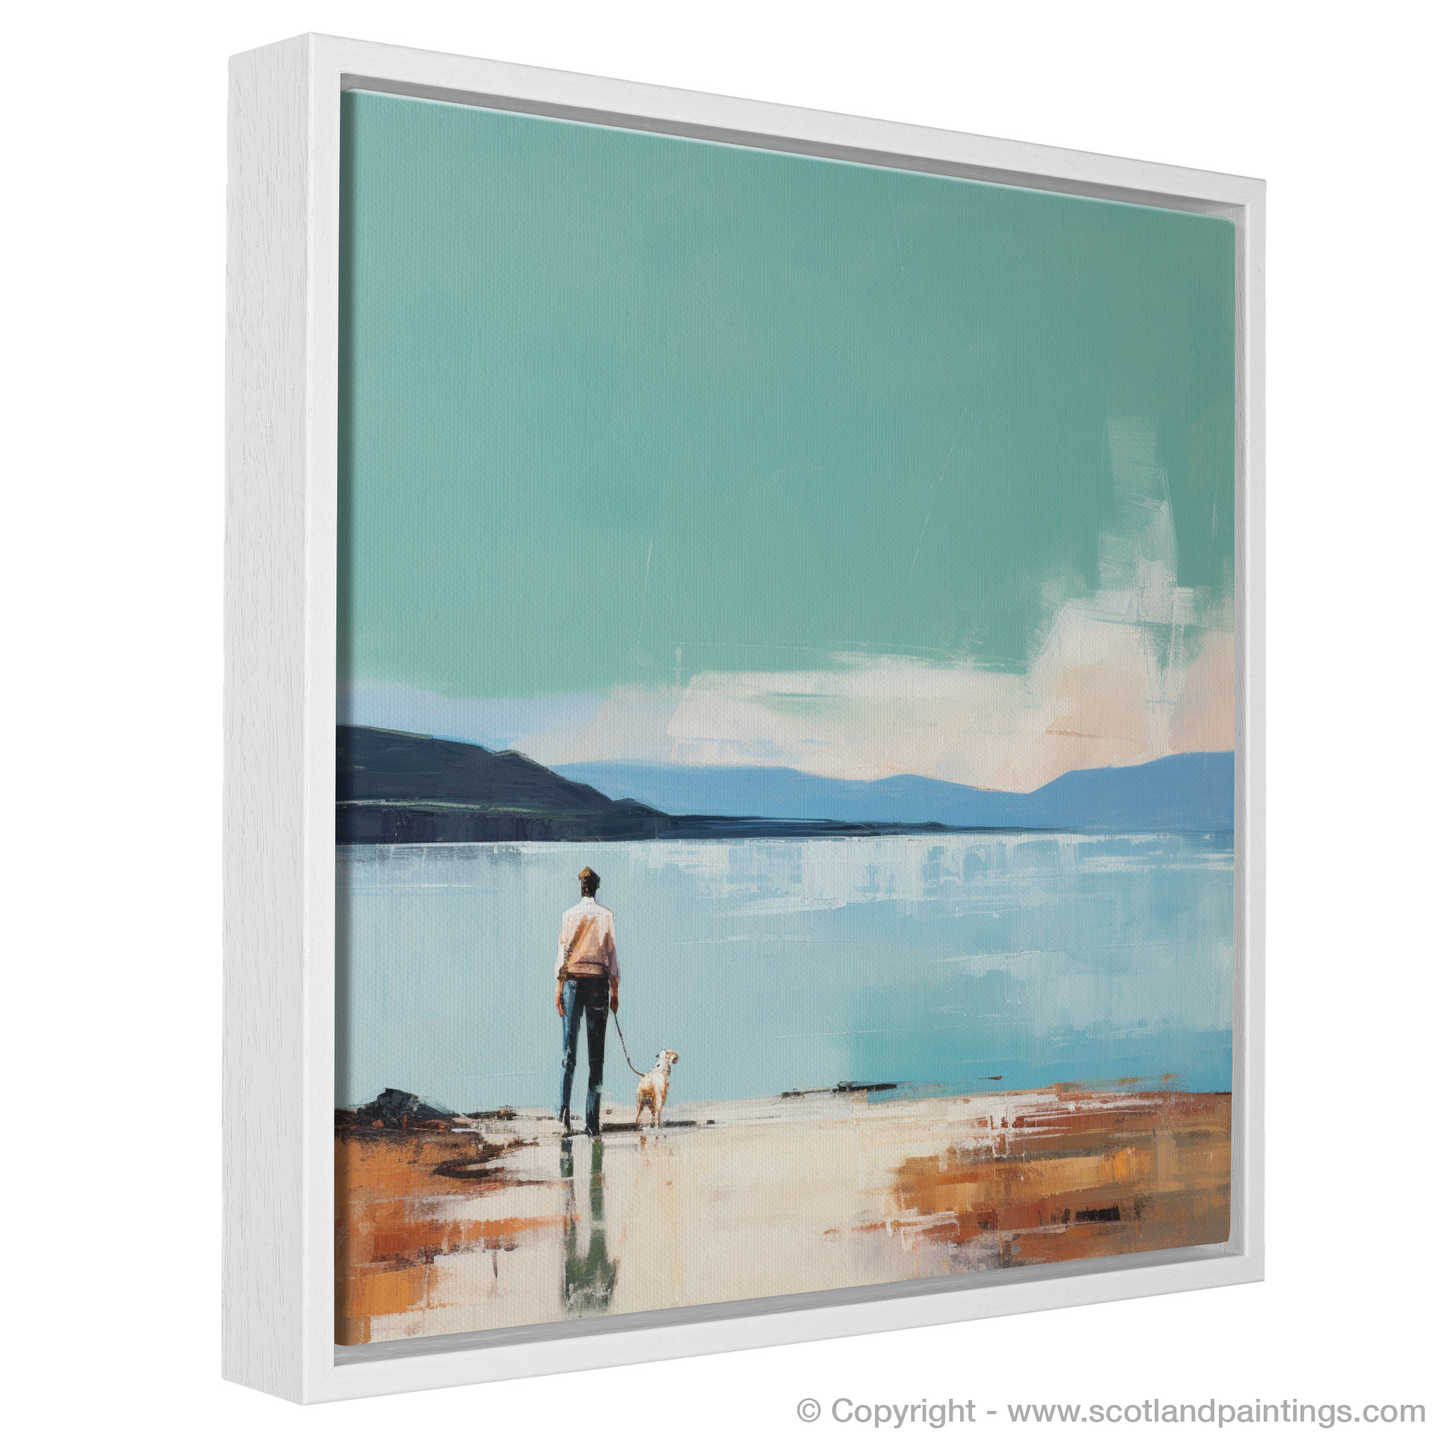 Painting and Art Print of A man walking dog at the side of Loch Lomond entitled "Serene Companionship at Loch Lomond".